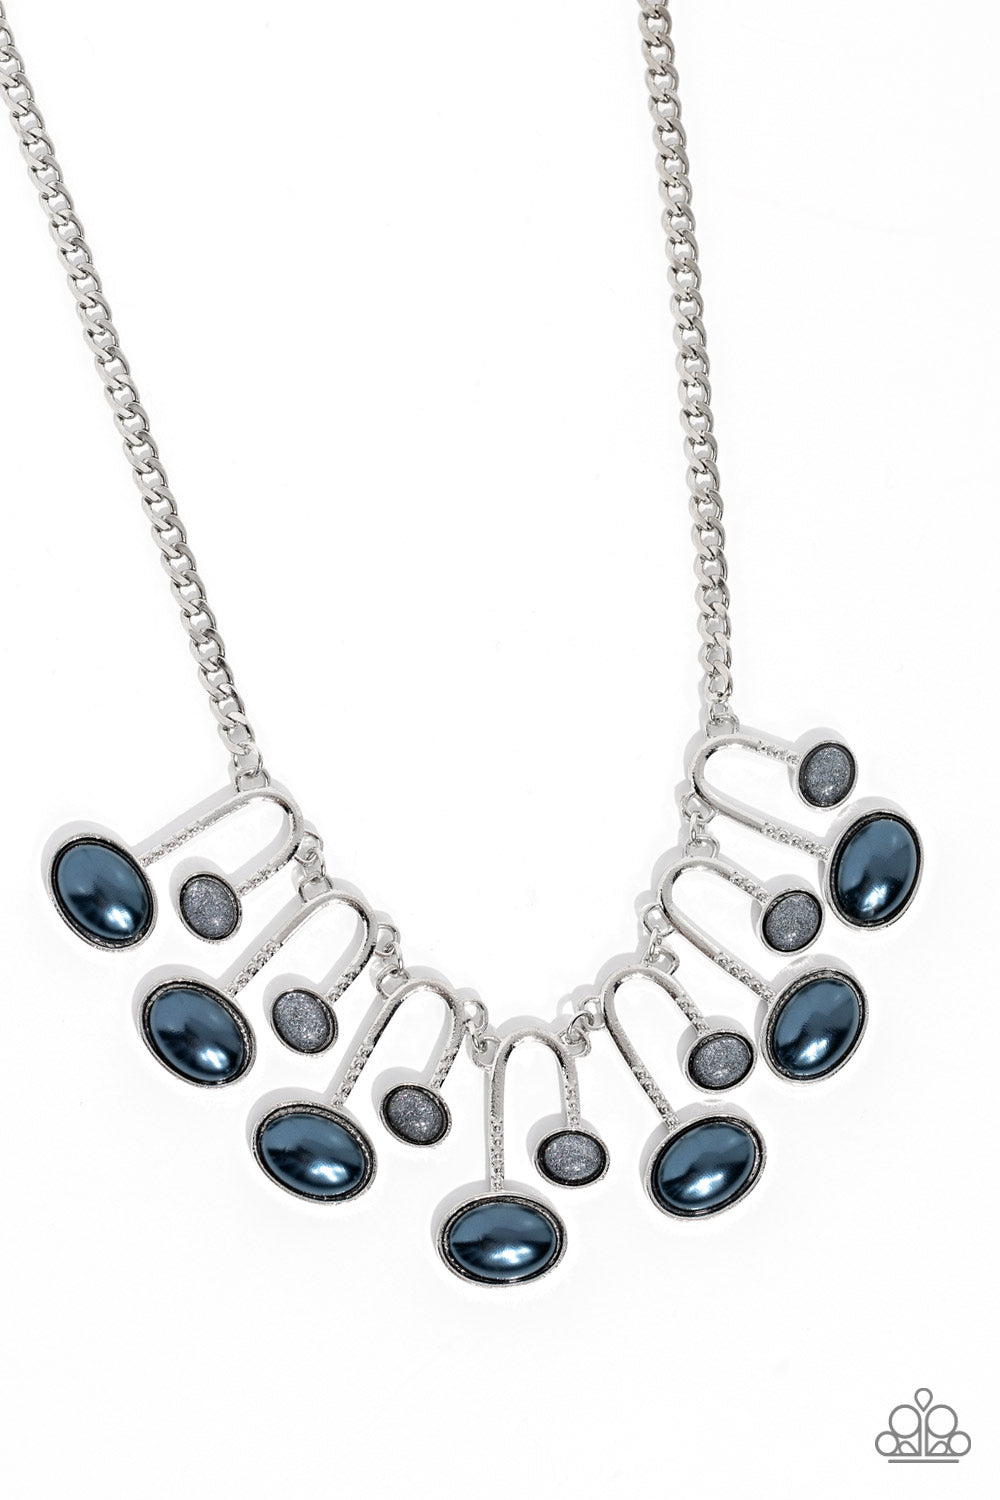 ABSTRACT ADORNMENT BLUE-NECKLACE